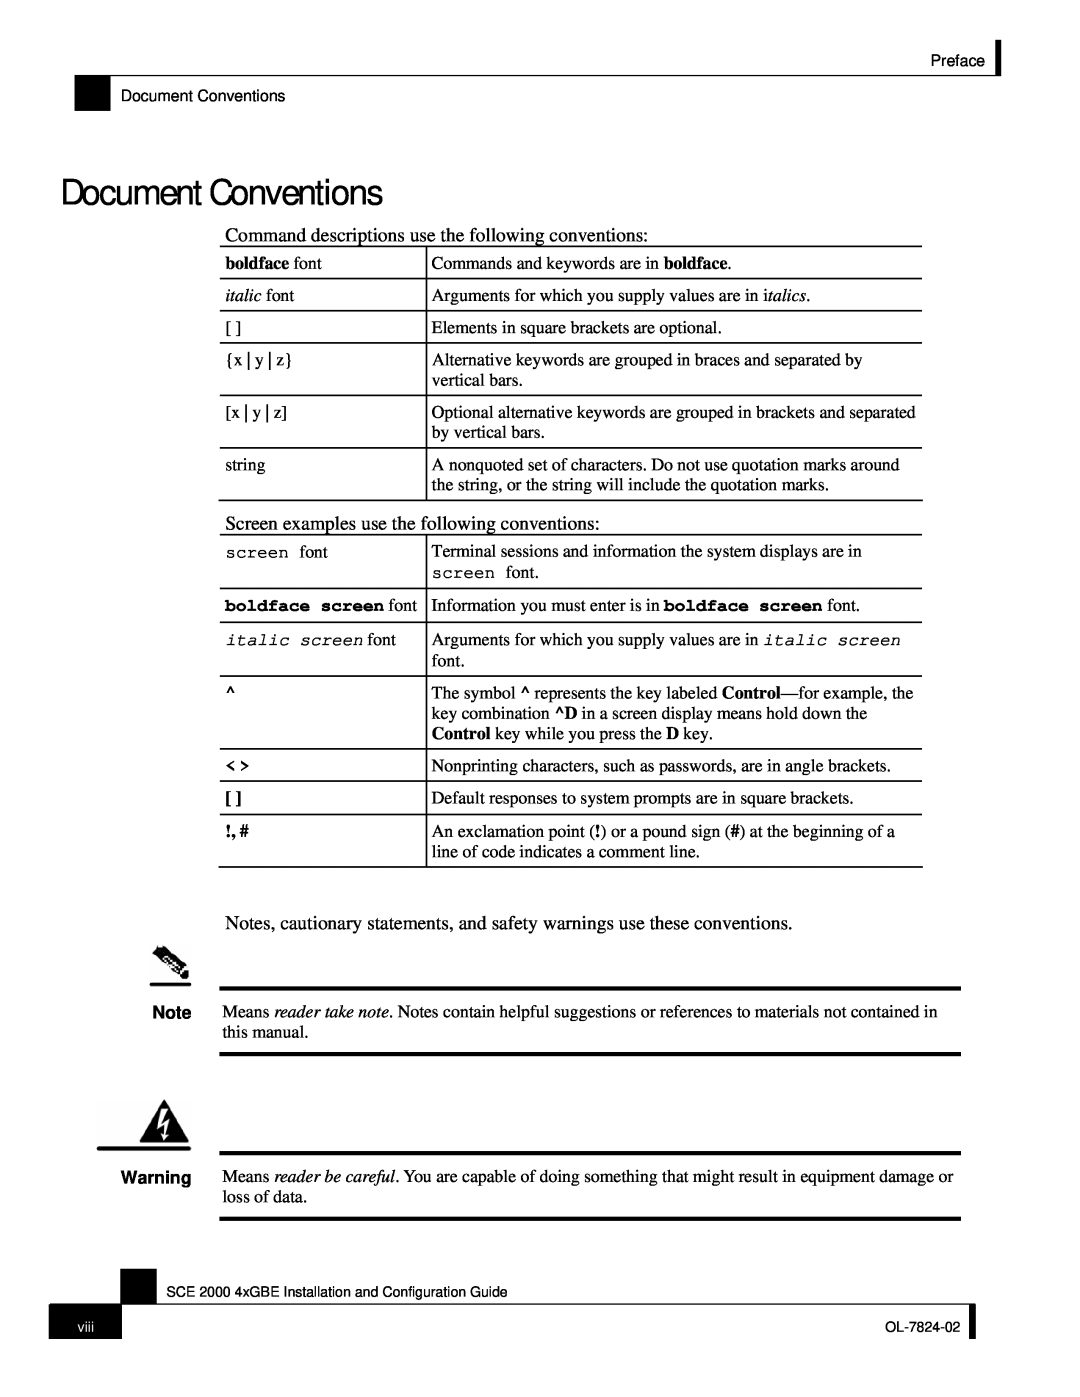 Cisco Systems SCE 2000 4xGBE Document Conventions, boldface font, italic font, boldface screen font, italic screen font 